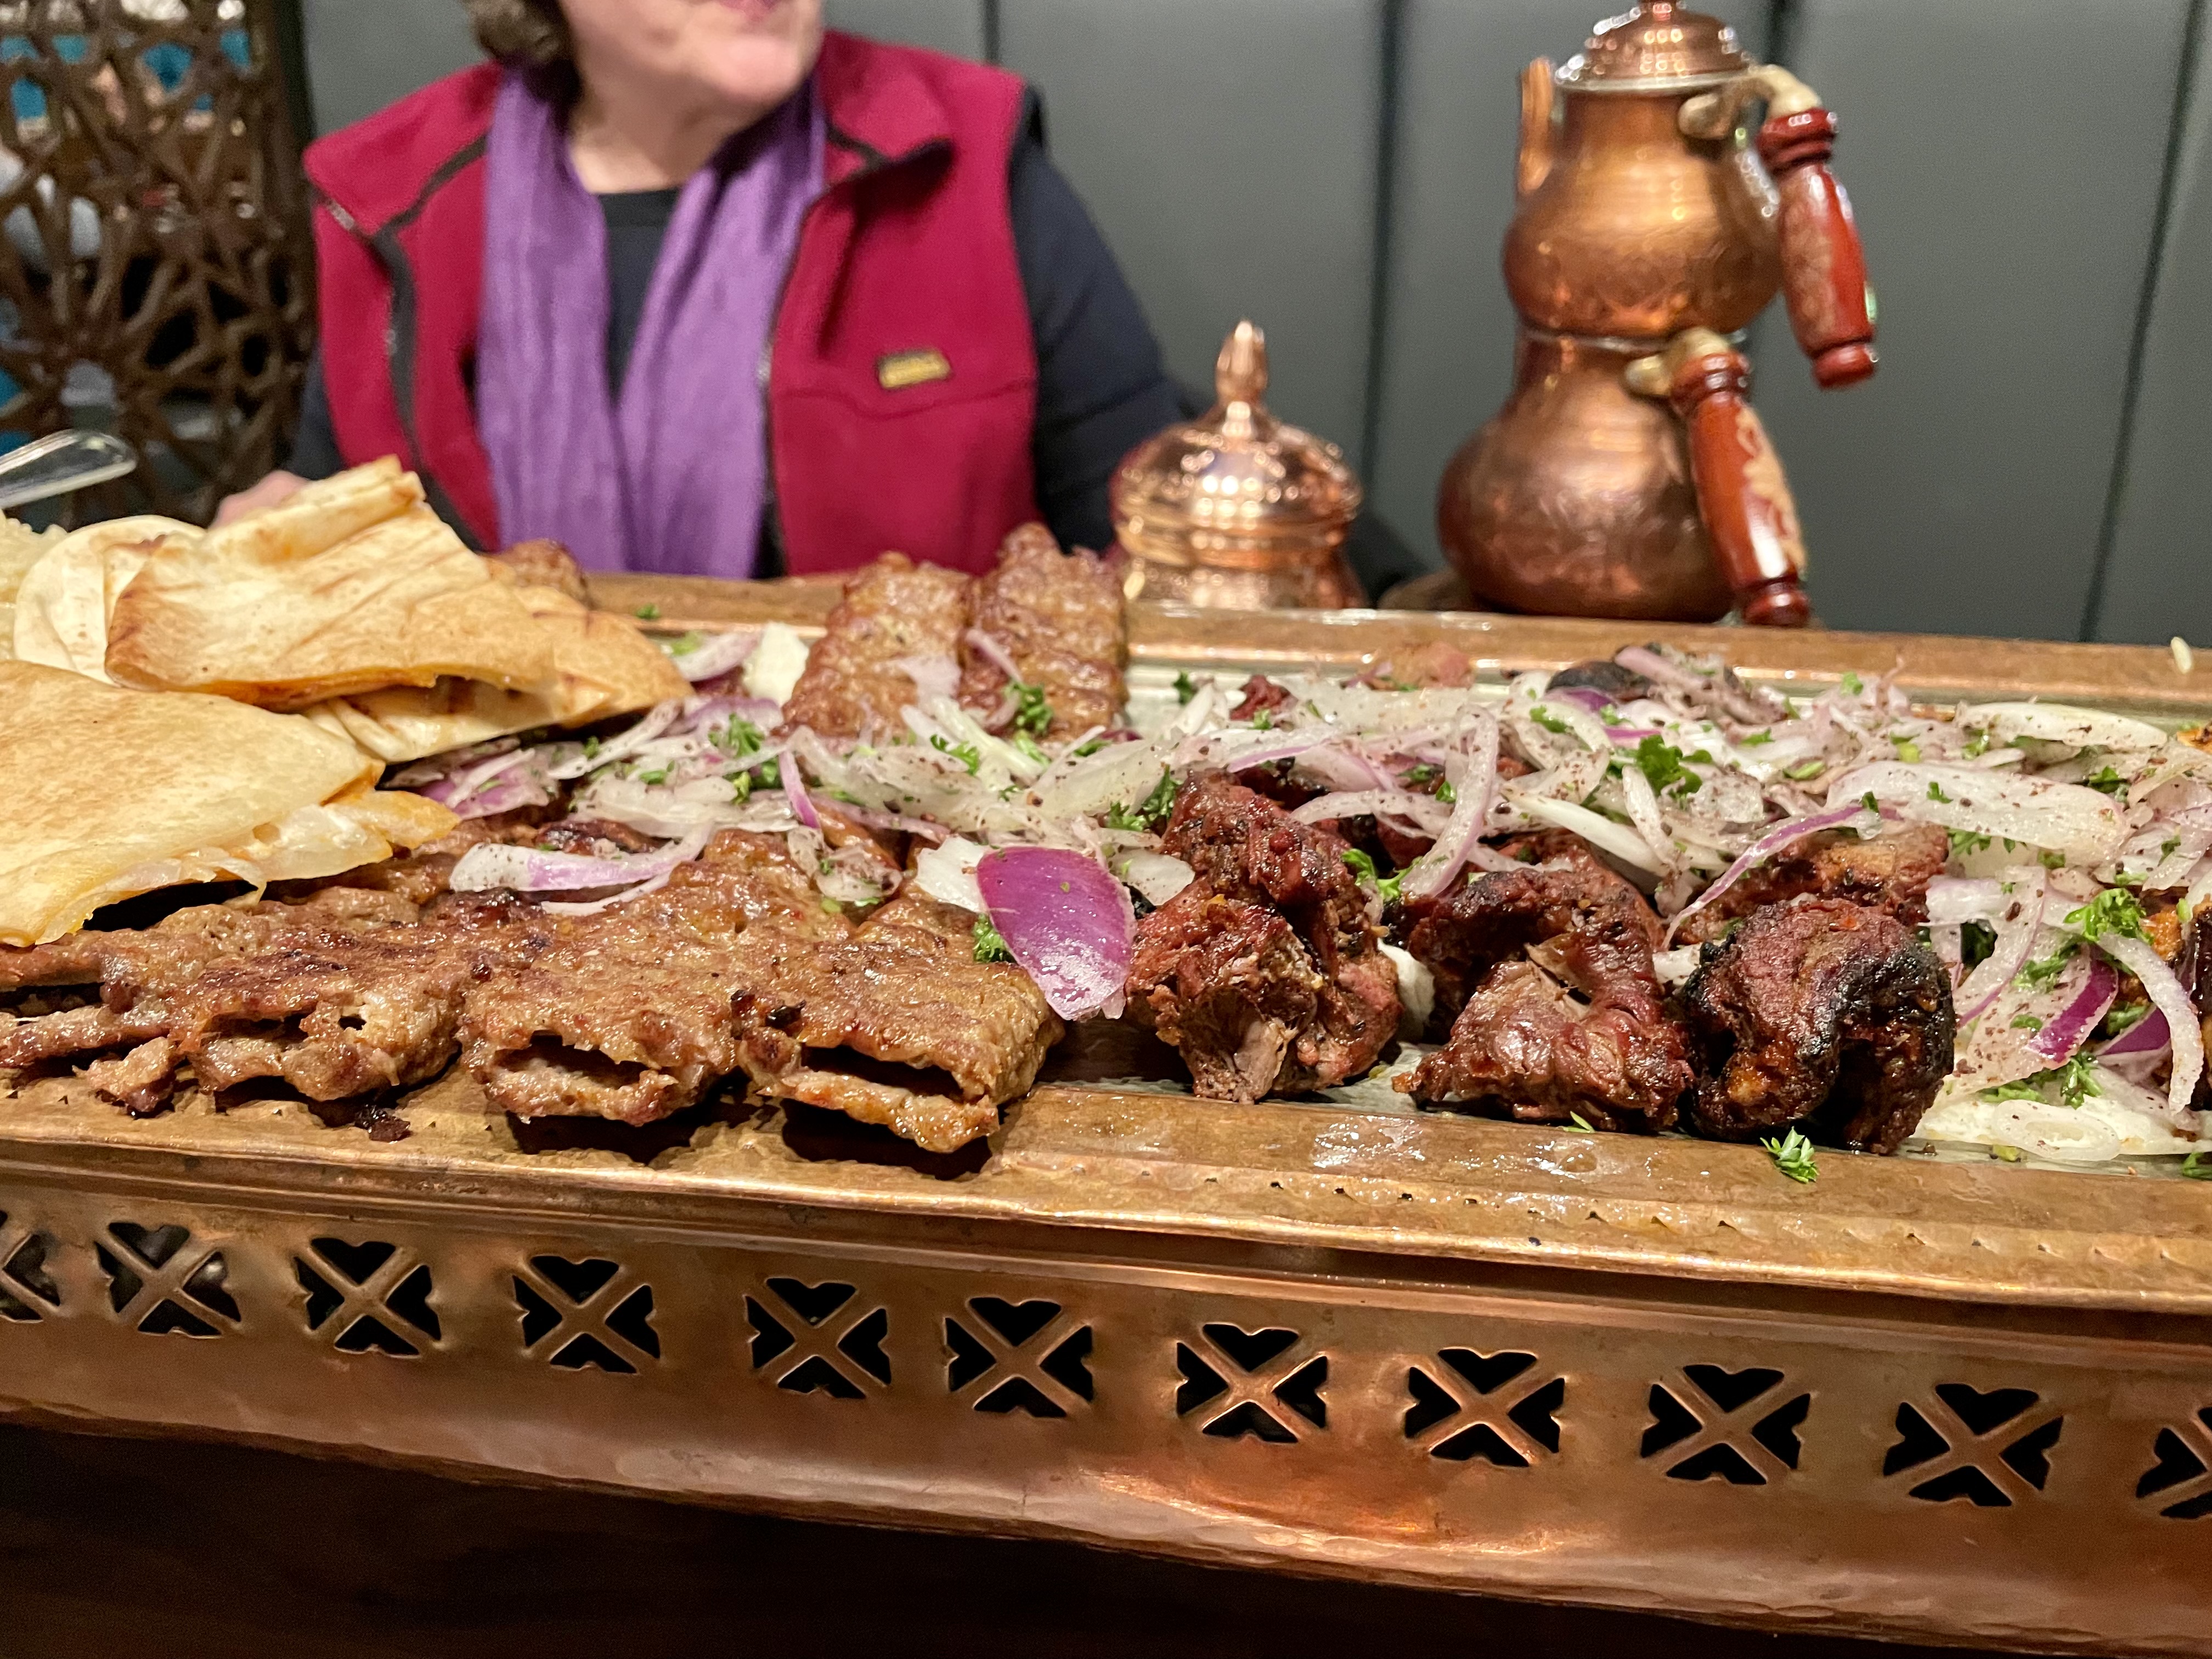 The platter arrived shortly after evening prayers ended and the dining room, filled with families, dug into their meals as the servers brought out even larger platters of perfectly grilled meats, rice, breads and vegetables from the kitchen 